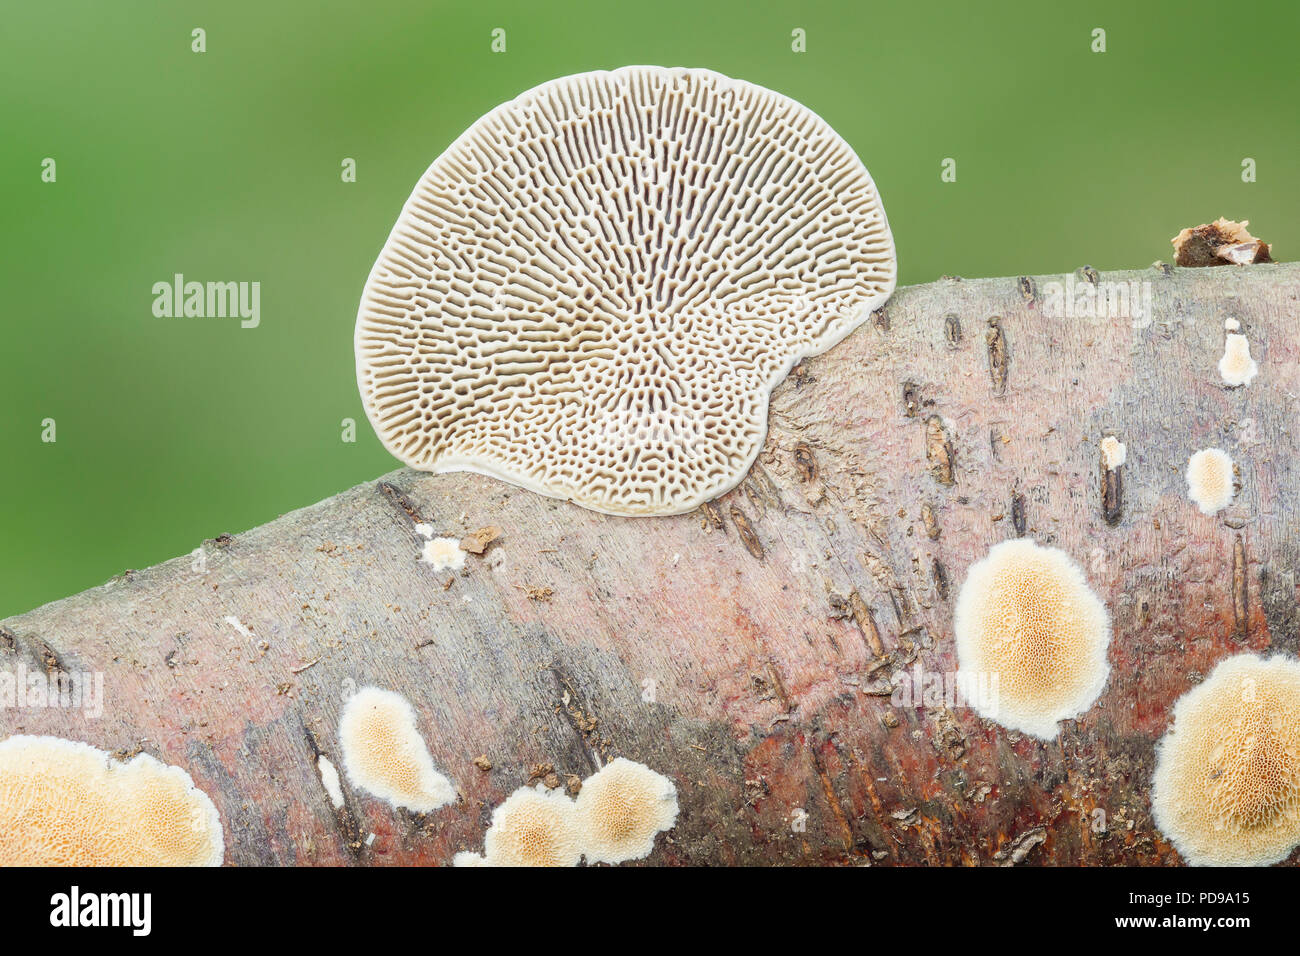 Thin Walled Maze Polypore (Daedaleopsis confragosa) fungus on a tree branch, showing the fan-shaped fruiting body and maze-like underside. Stock Photo